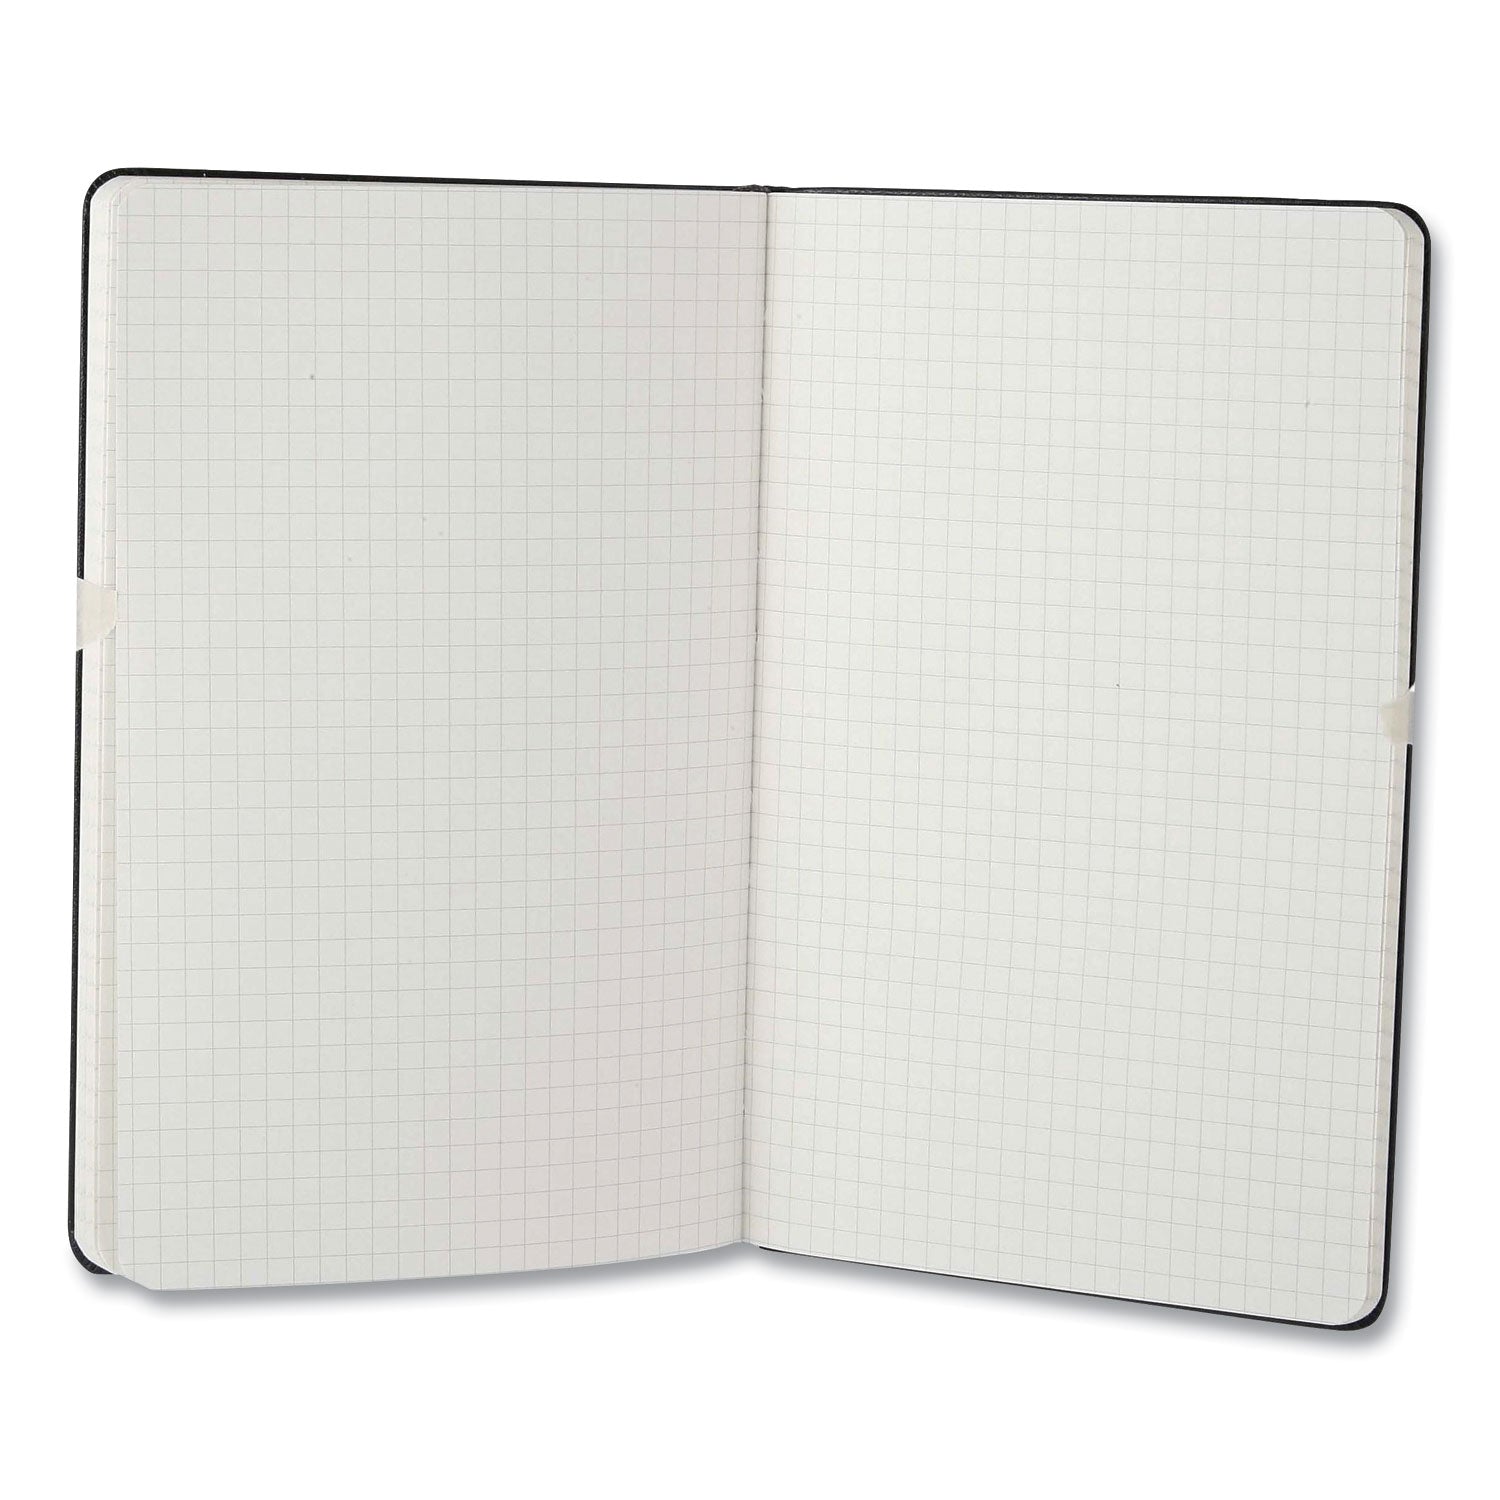 hard-cover-notebook-1-subject-quadrille-rule-black-cover-120-825-x-5-sheets_hbg701139 - 2